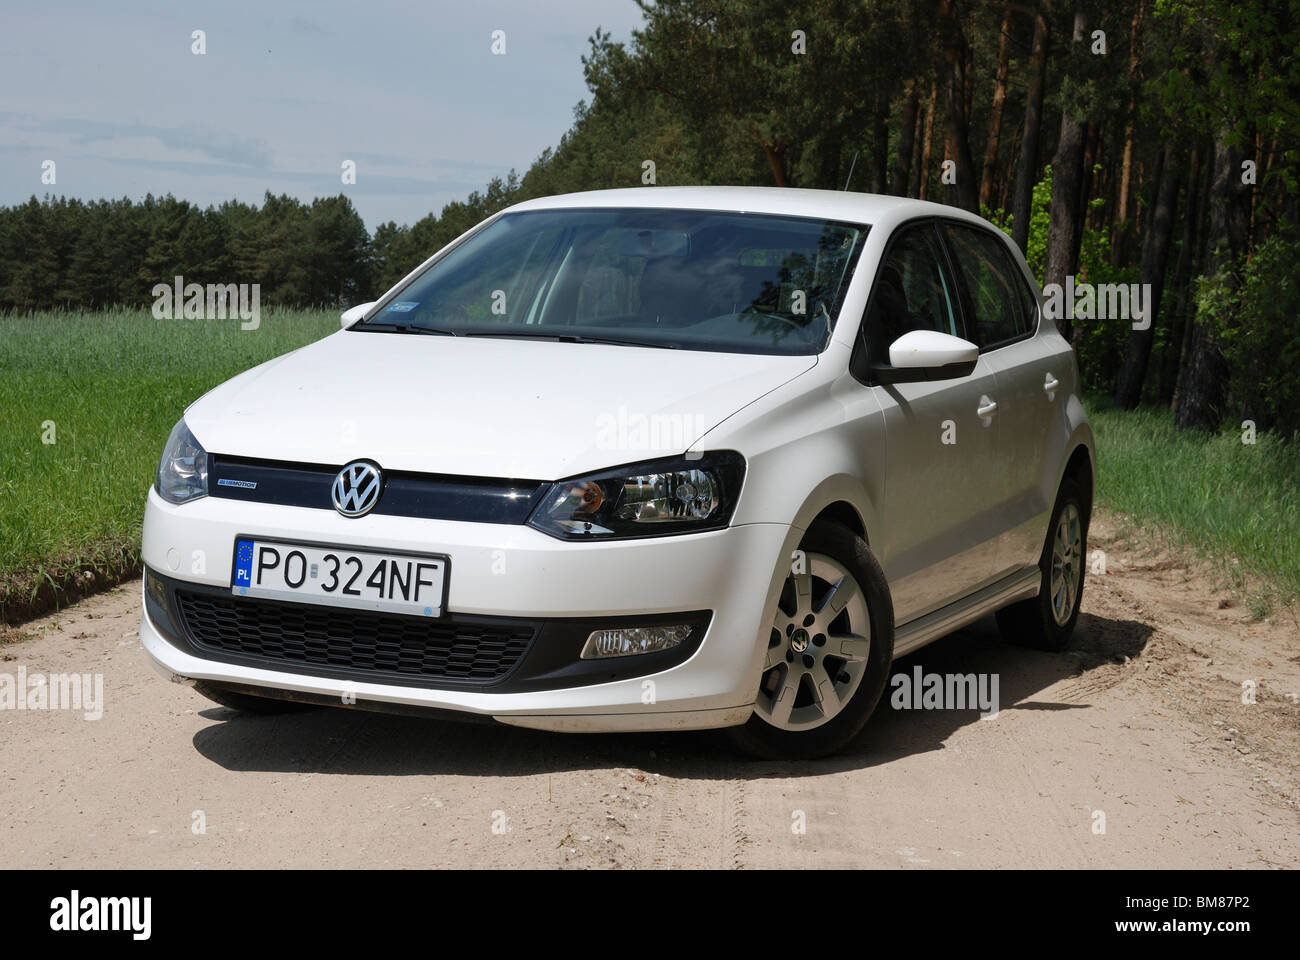 Polo 1.2 BlueMotion - MY 2010 - white - five doors (5D) - subcompact city car - on countryside road Stock Photo - Alamy